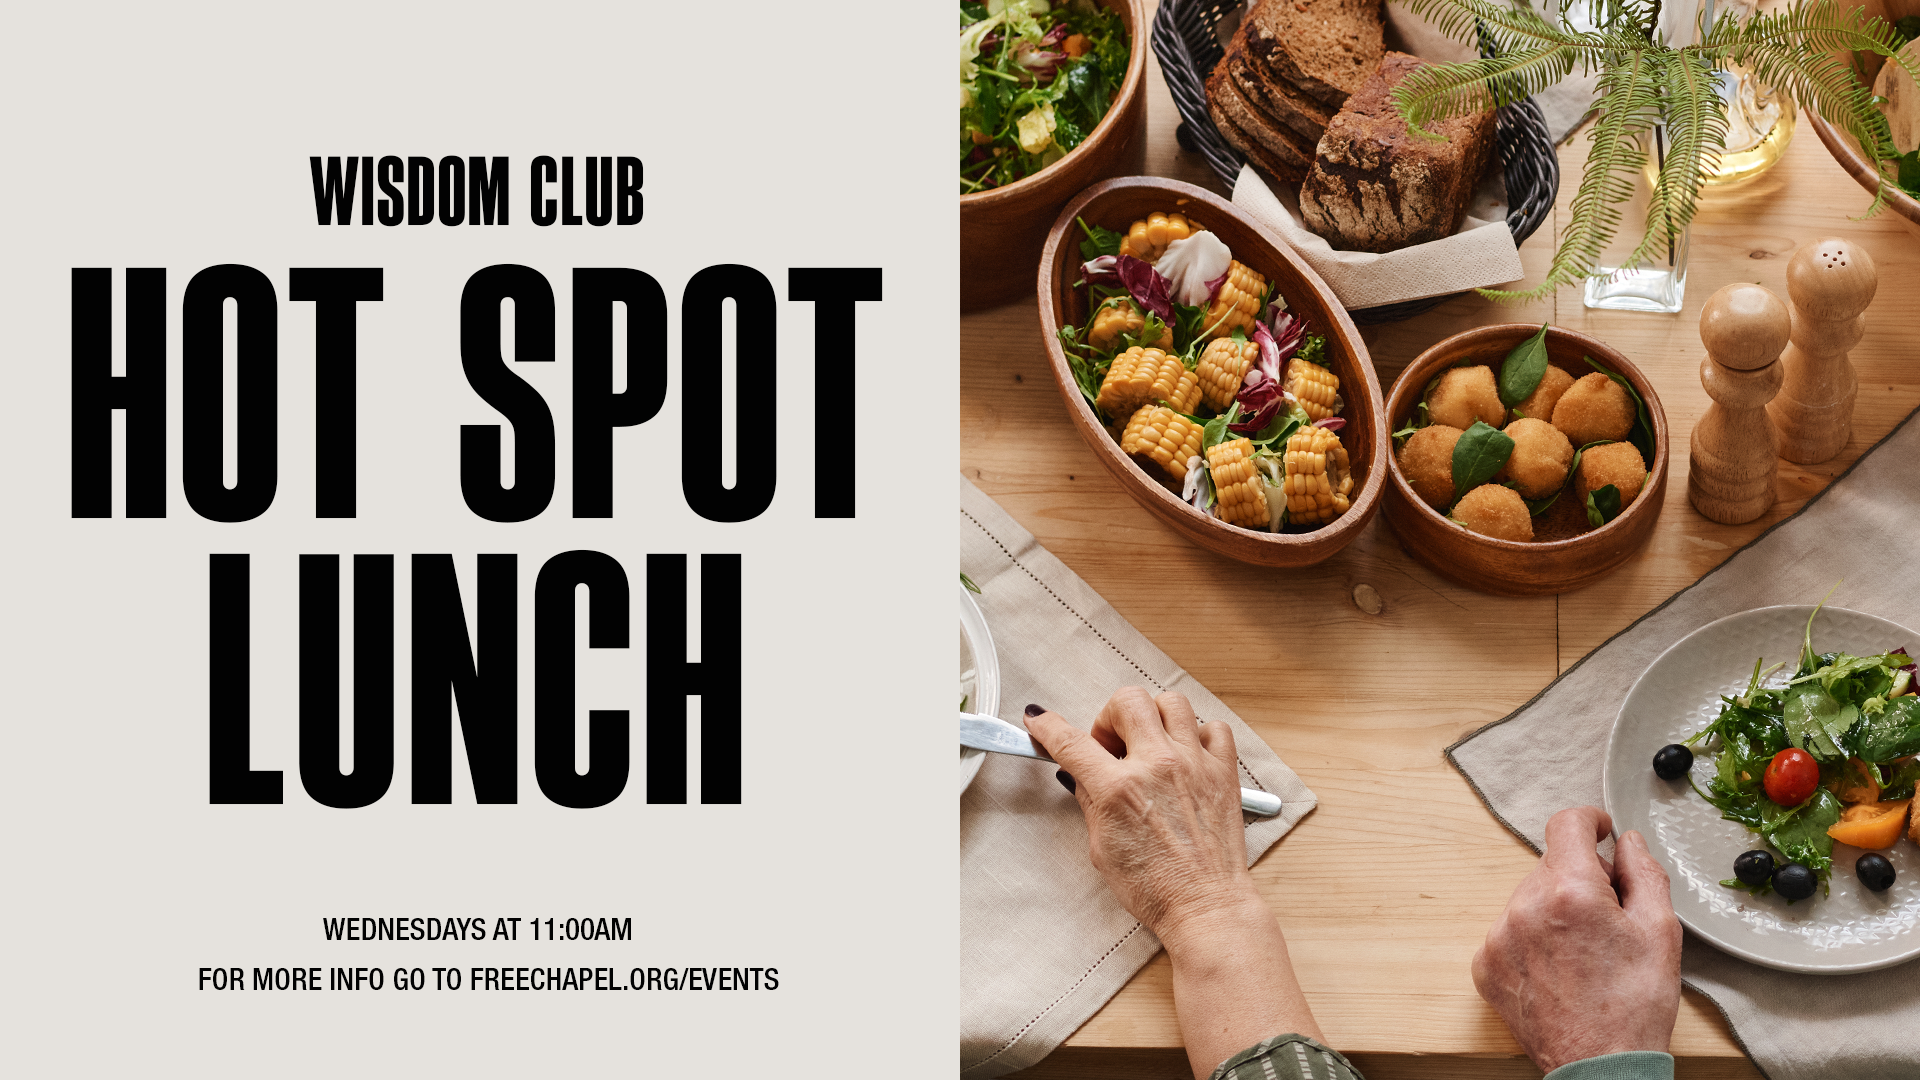 Wisdom Club: Hot Spot Lunch at the Gainesville campus